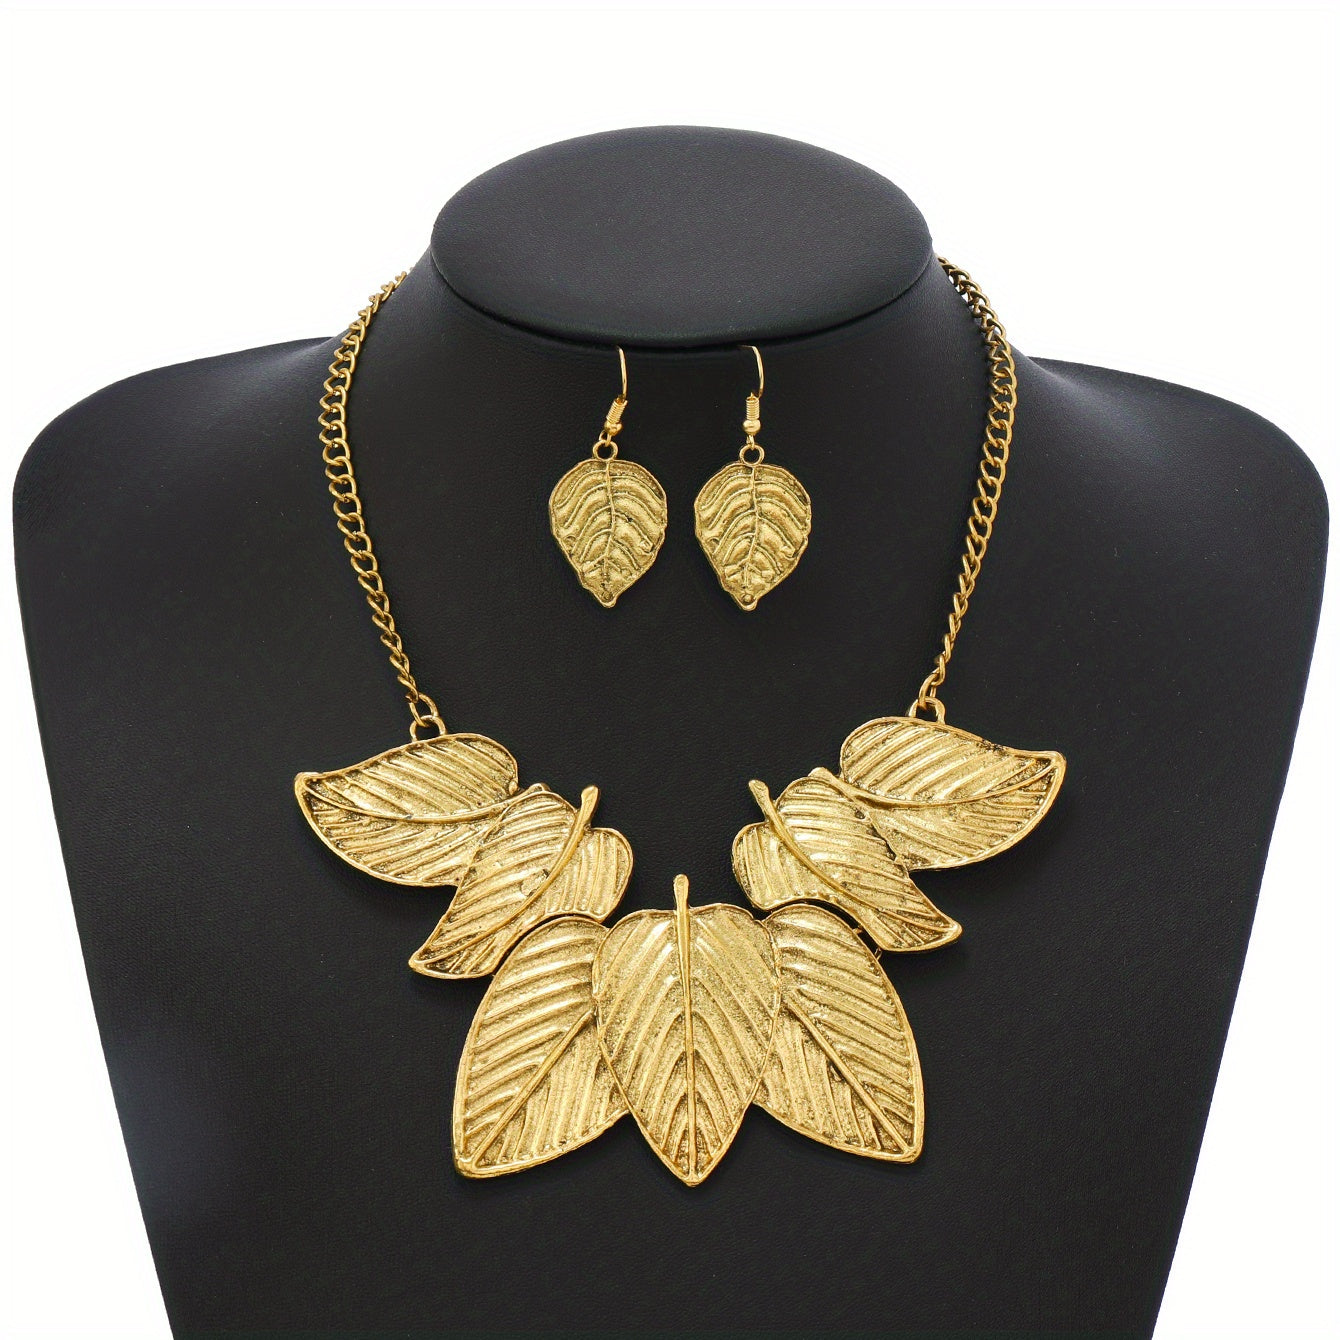 3pcs Vintage Jewelry Set Trendy Leaf Design Exaggerated Party Accessories For Female Perfect Chrismas Gift For Your Love